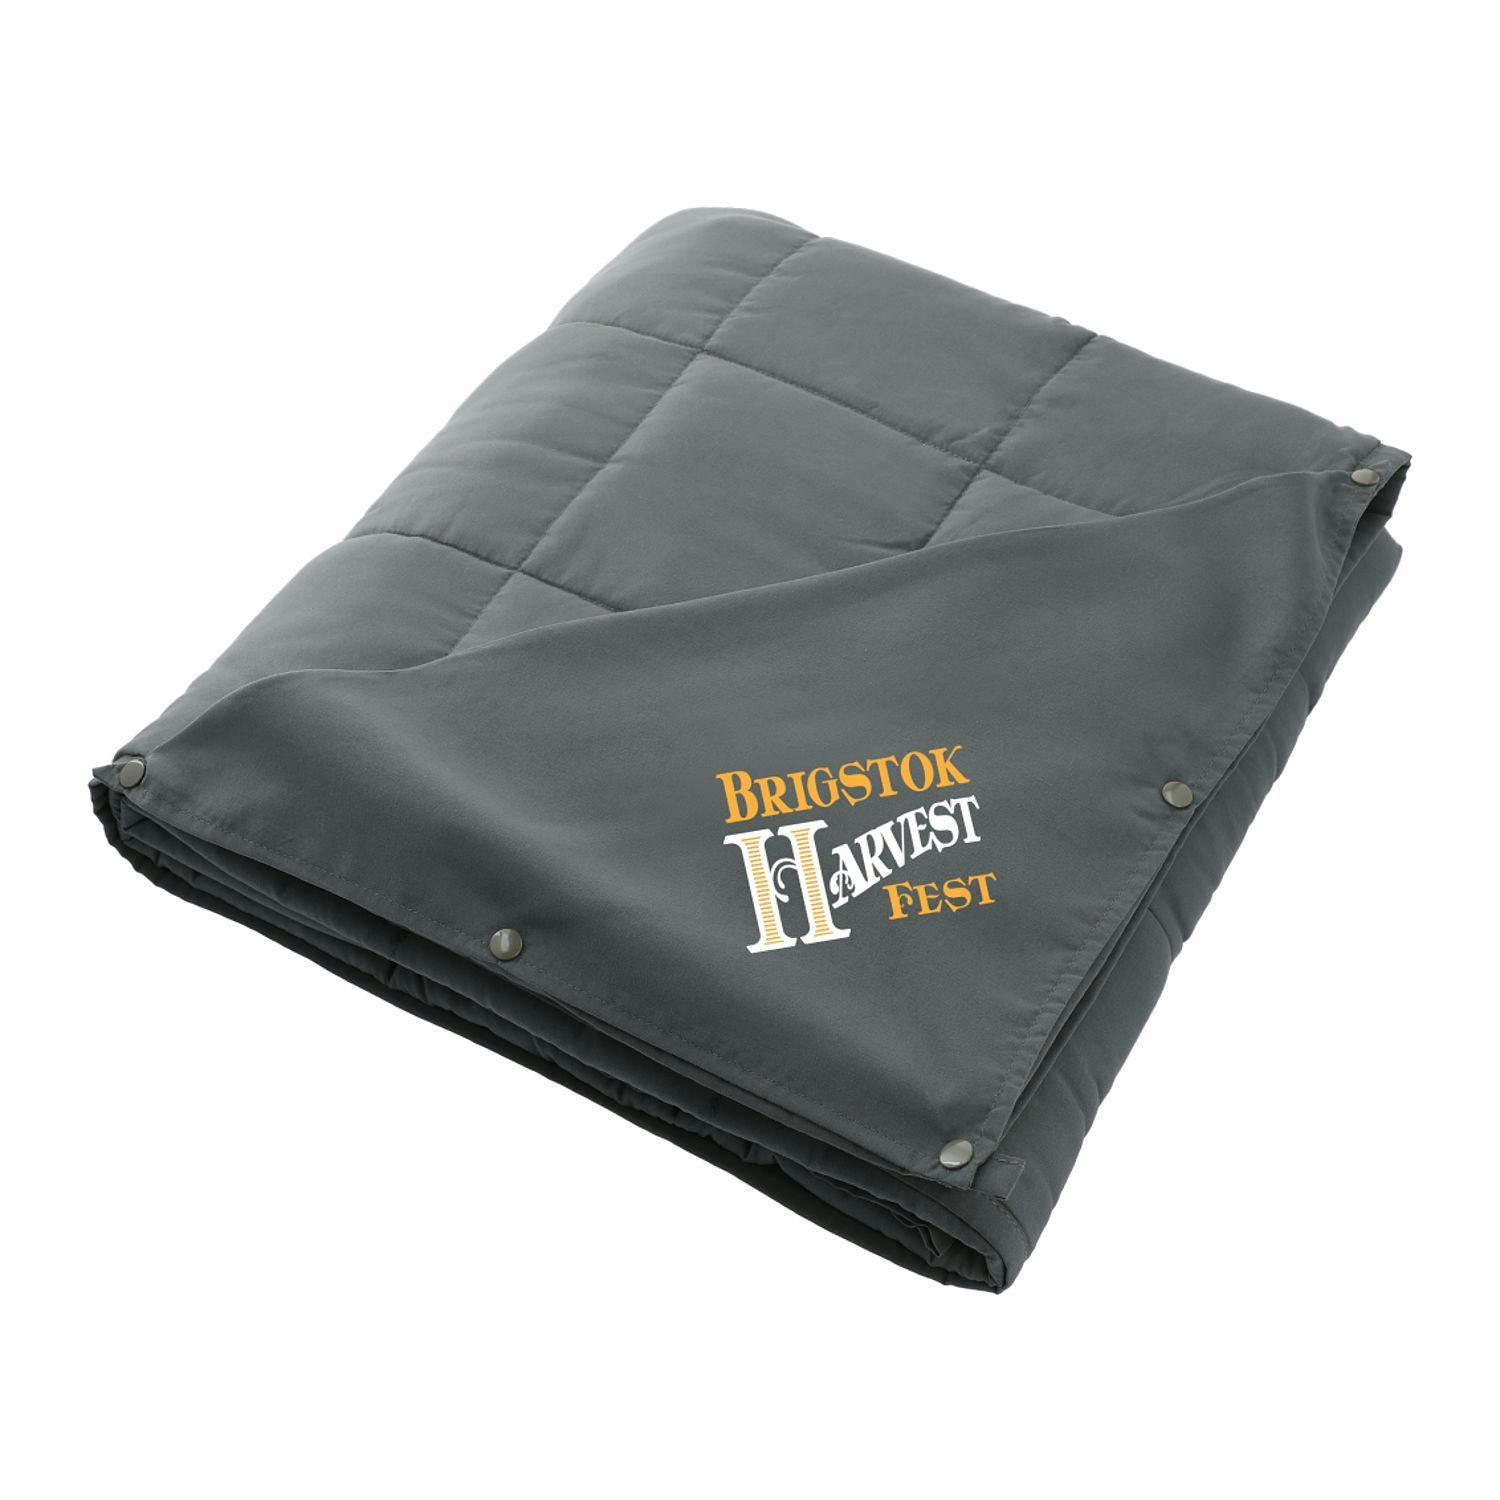 Zen 12lb Weighted Blanket - additional Image 2